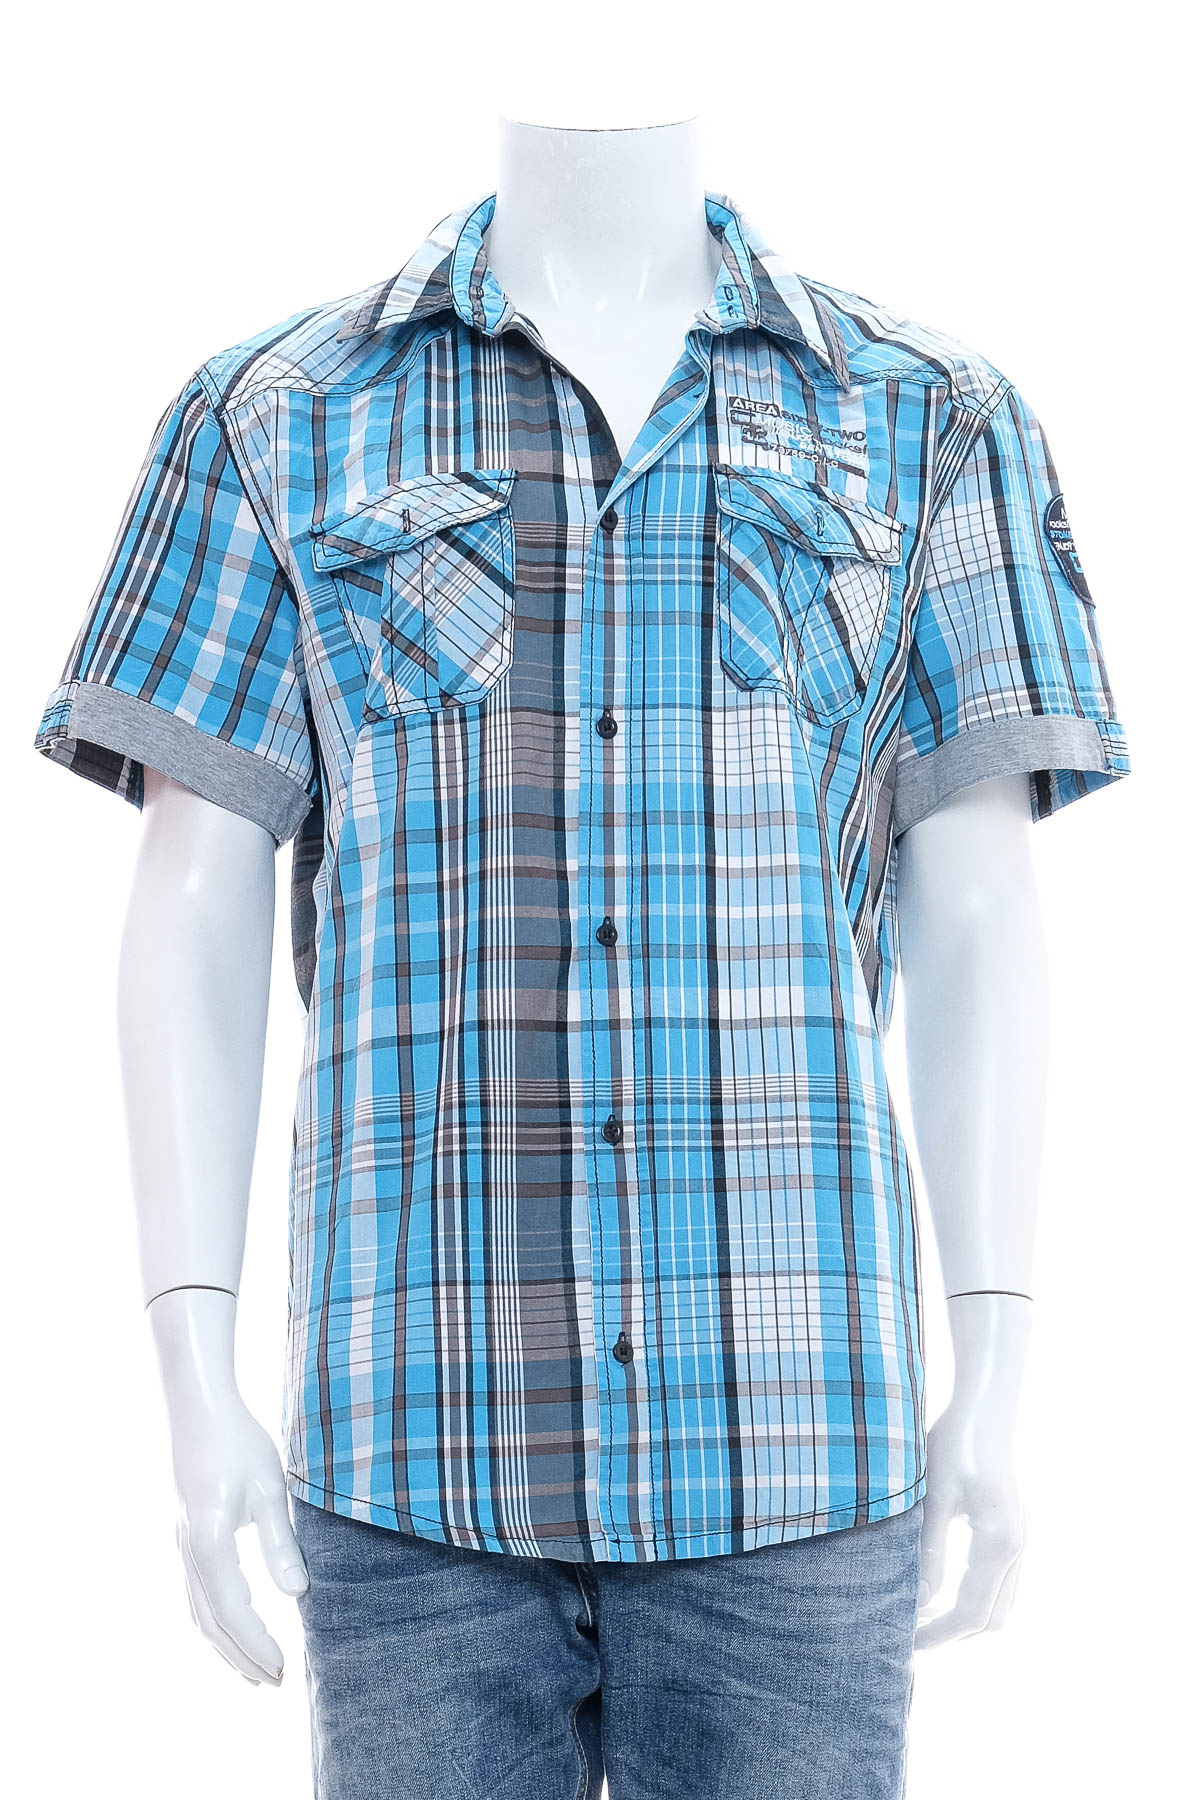 Men's shirt - Area Sixty-Two - 0